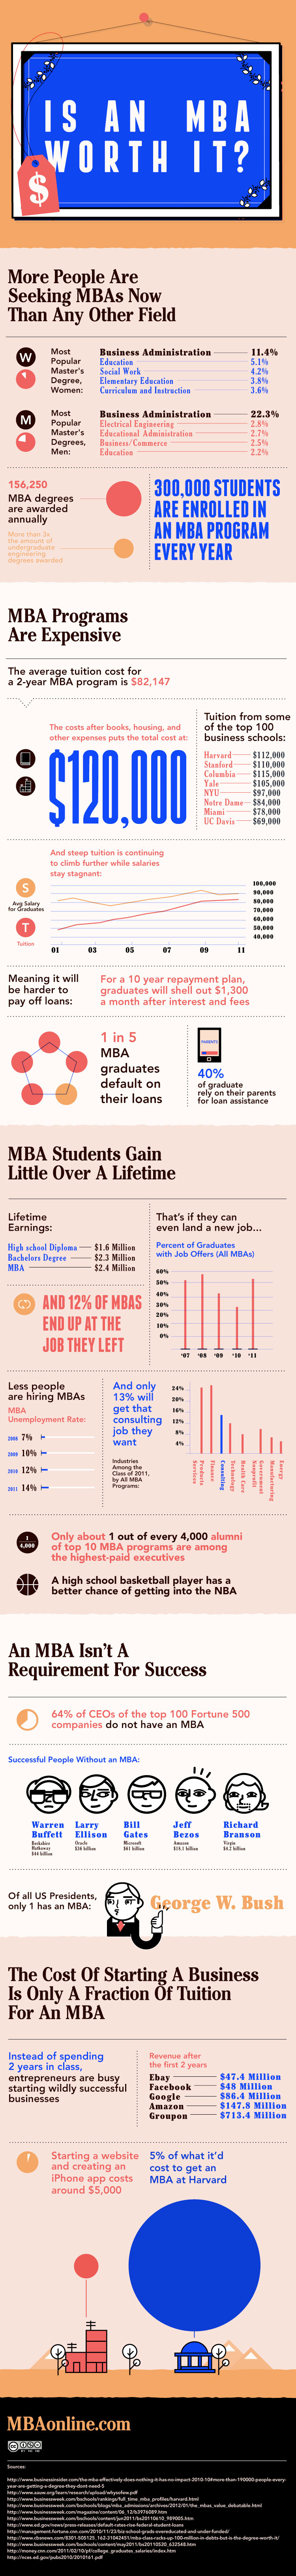 Is-An-Mba-Worth-It-infographic